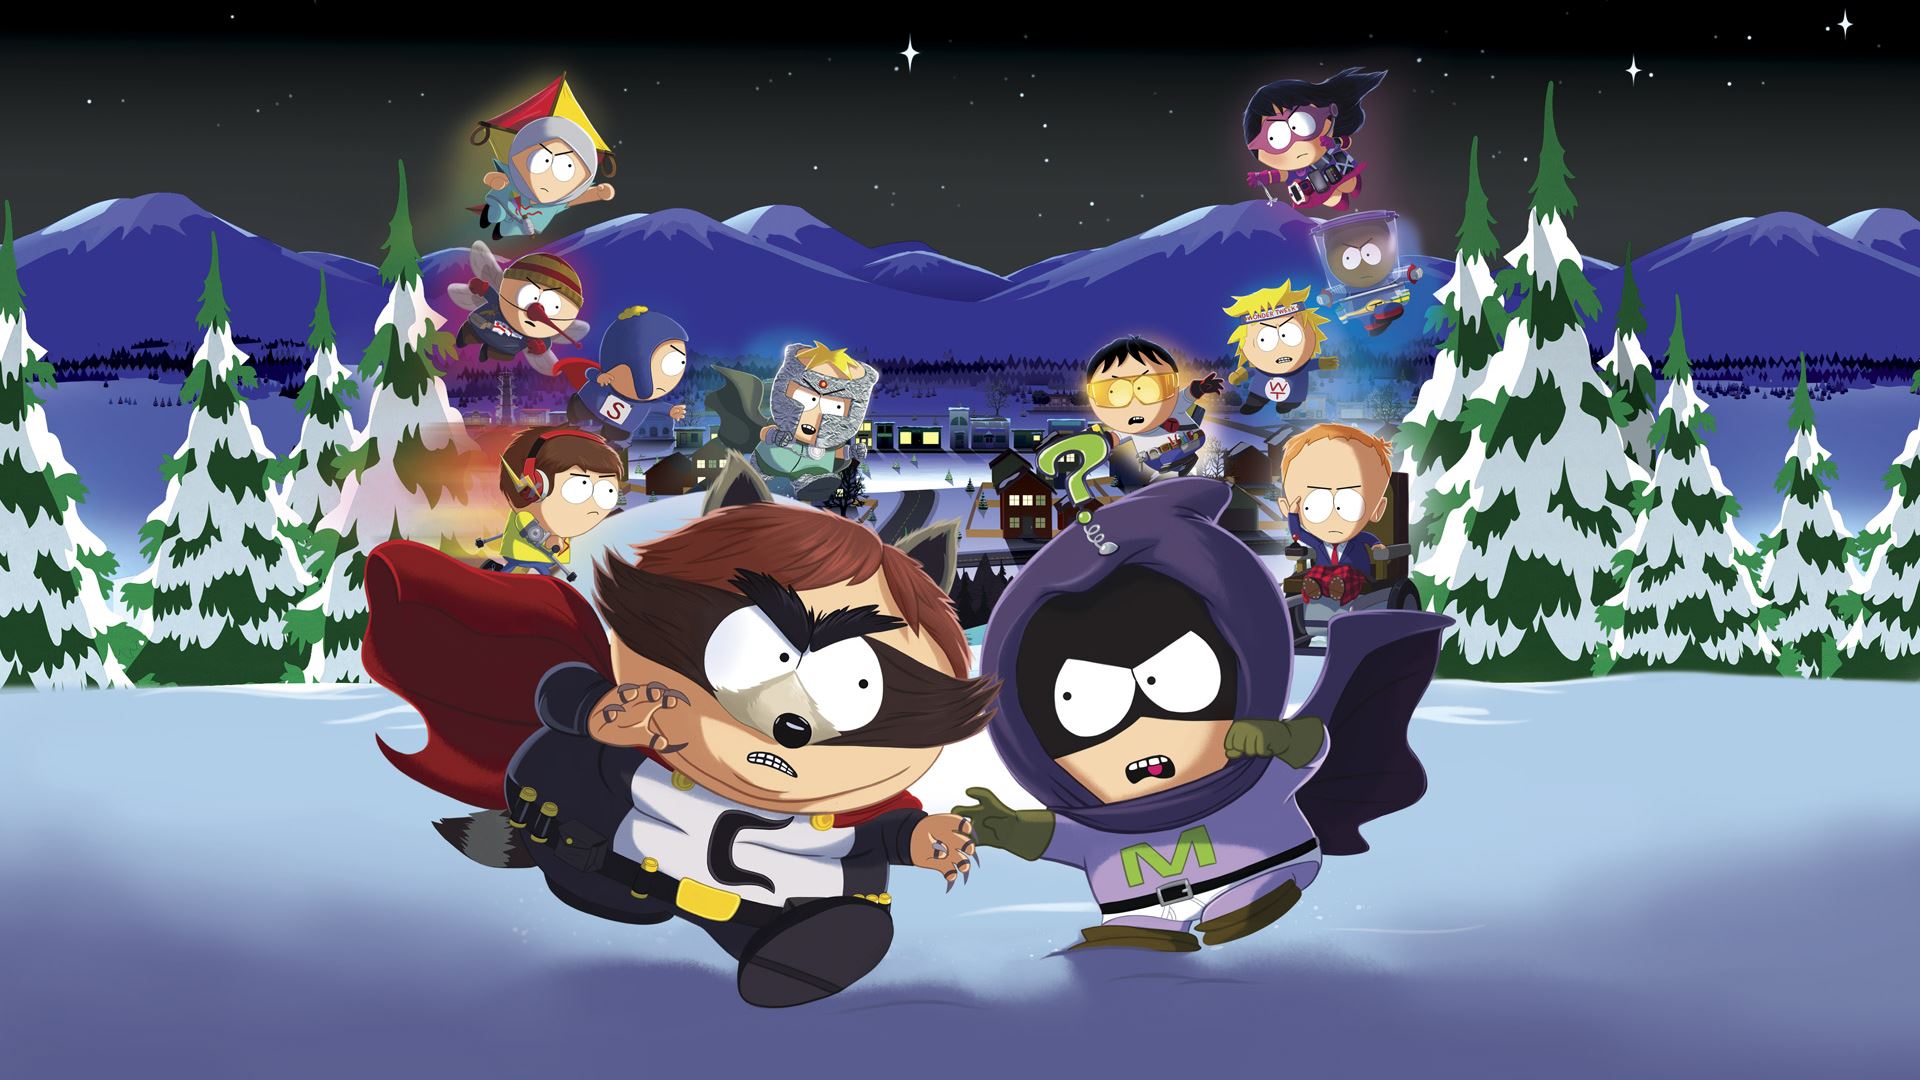 #9. South Park: The Fractured But Whole